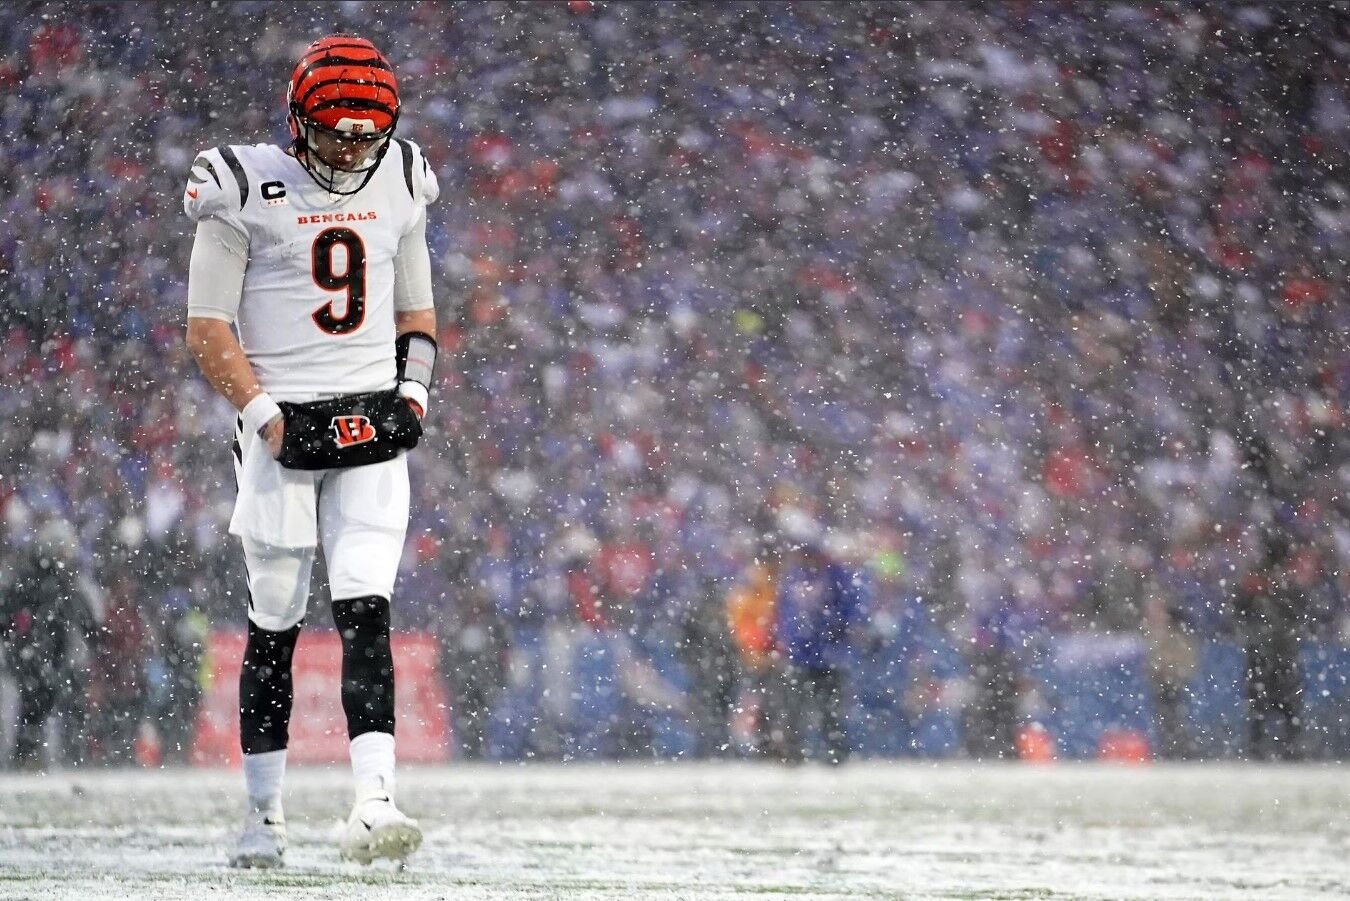 NFL playoffs: Bengals look to unseat Chiefs as top dog in AFC